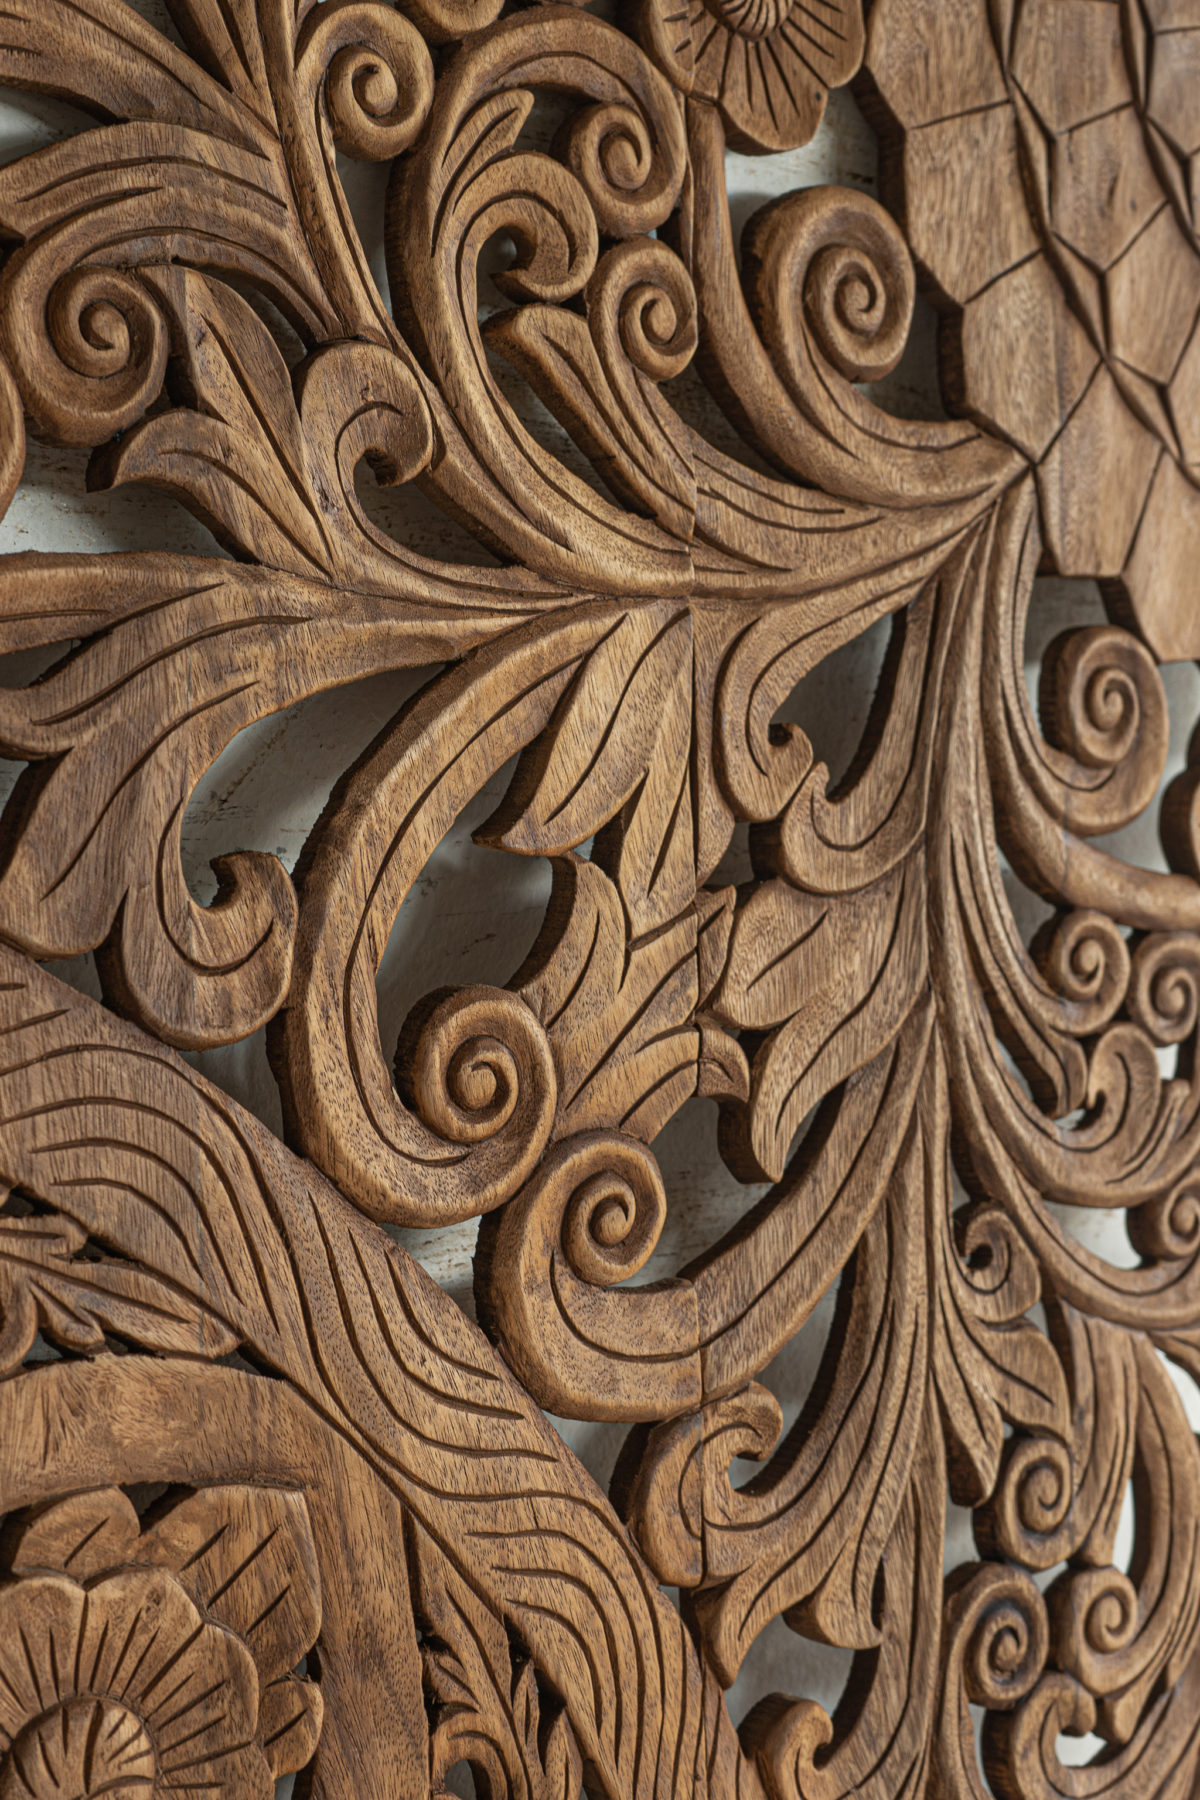 Detailed wood carving from Thailand